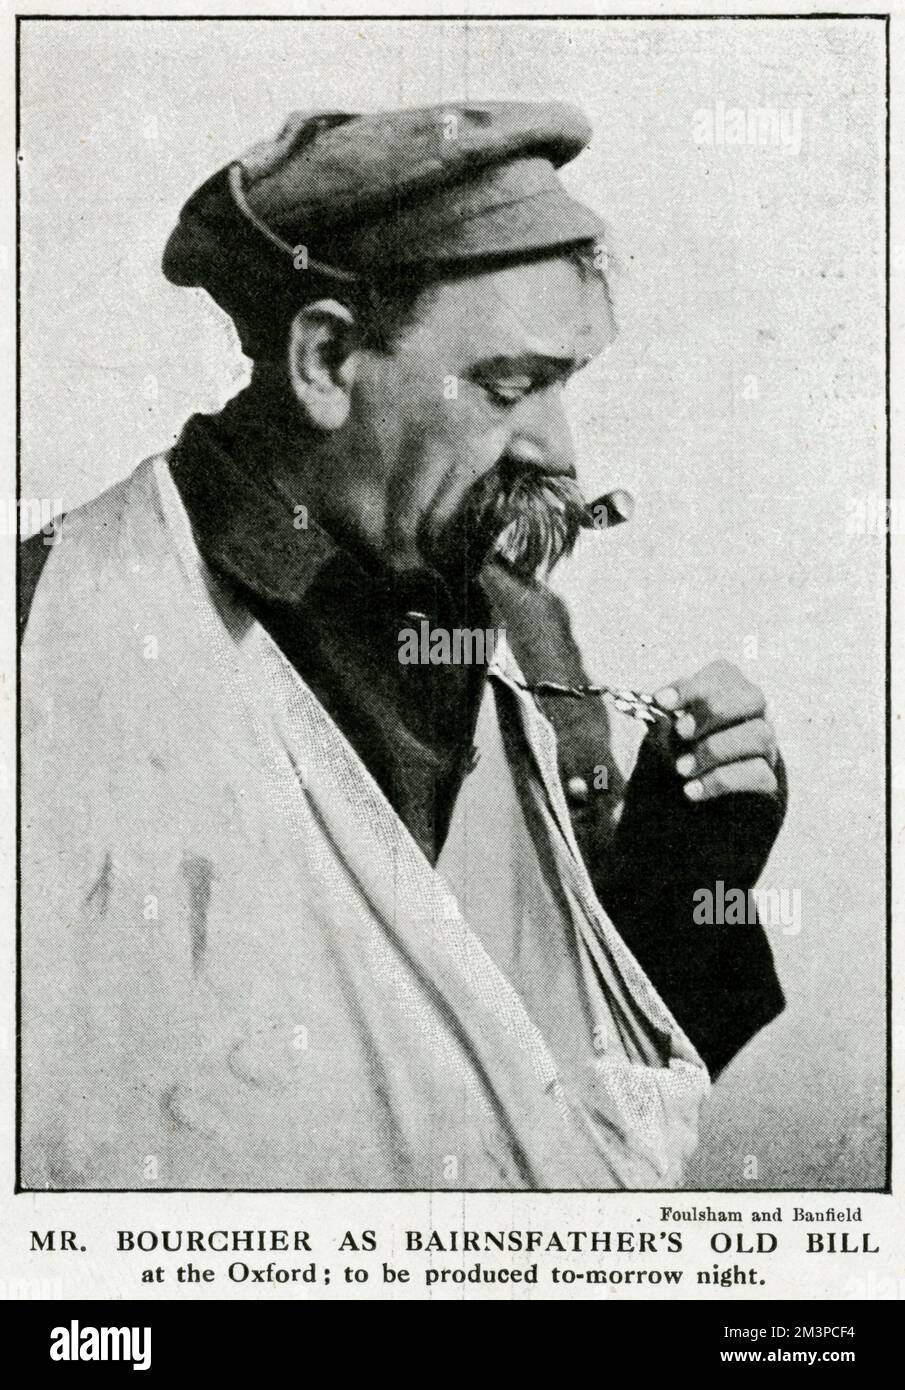 Arthur Bourchier in the role of Old Bill, the popular character created by Bruce Bairnsfather. Bourchier played the part in the original production of 'The Better 'Ole', a musical comedy based on the character, which was co-written by Bairnsfather and Arthur Elliot. Opening on 4 August 1917 at the Oxford Music Hall, London, it ran for over 800 performances.     Date: 1917 Stock Photo